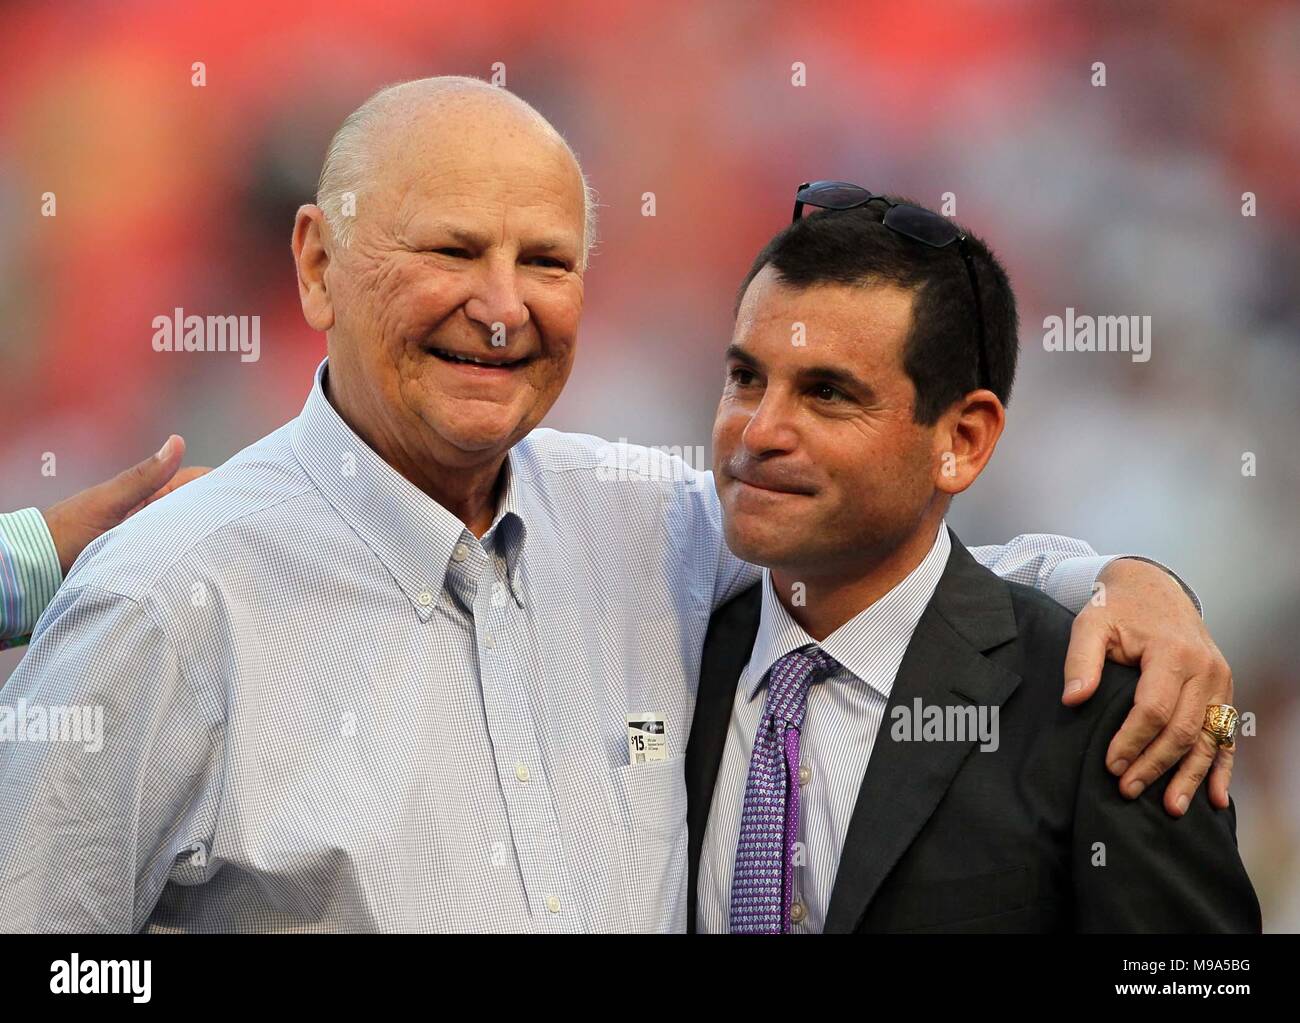 March 23, 2018 - FILE - HARRY WAYNE HUIZENGA (born: December 29, 1937 died: March 22, 2018) was an American businessman and entrepreneur. He was the owner of Blockbuster Video, AutoNation, Waste Management, Inc., the Miami Dolphins of the National Football League, the Florida Panthers of the National Hockey League, and the Florida Marlins of Major League Baseball. PICTURED: Sept. 28, 2011 - Miami Gardens, Florida, U.S. - Former owner Wayne Huizenga with Marlins president David Samson. (Credit Image: © Allen Eyestone/The Palm Beach Post/ZUMAPRESS.com) Stock Photo